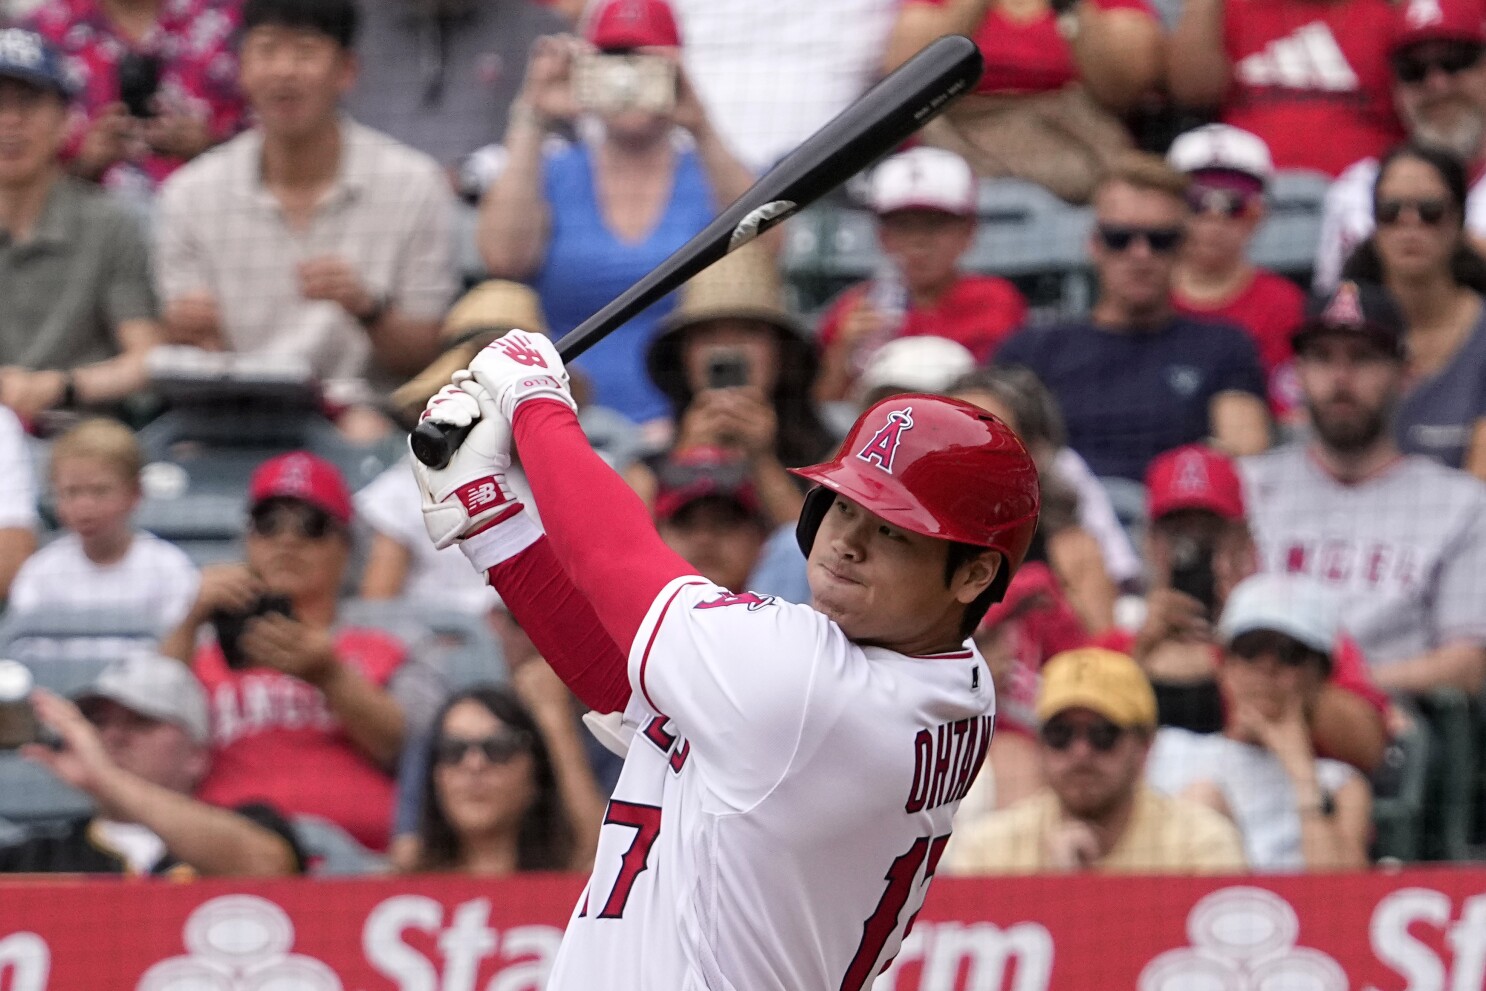 Shohei Ohtani homers in last home game before trade deadline as